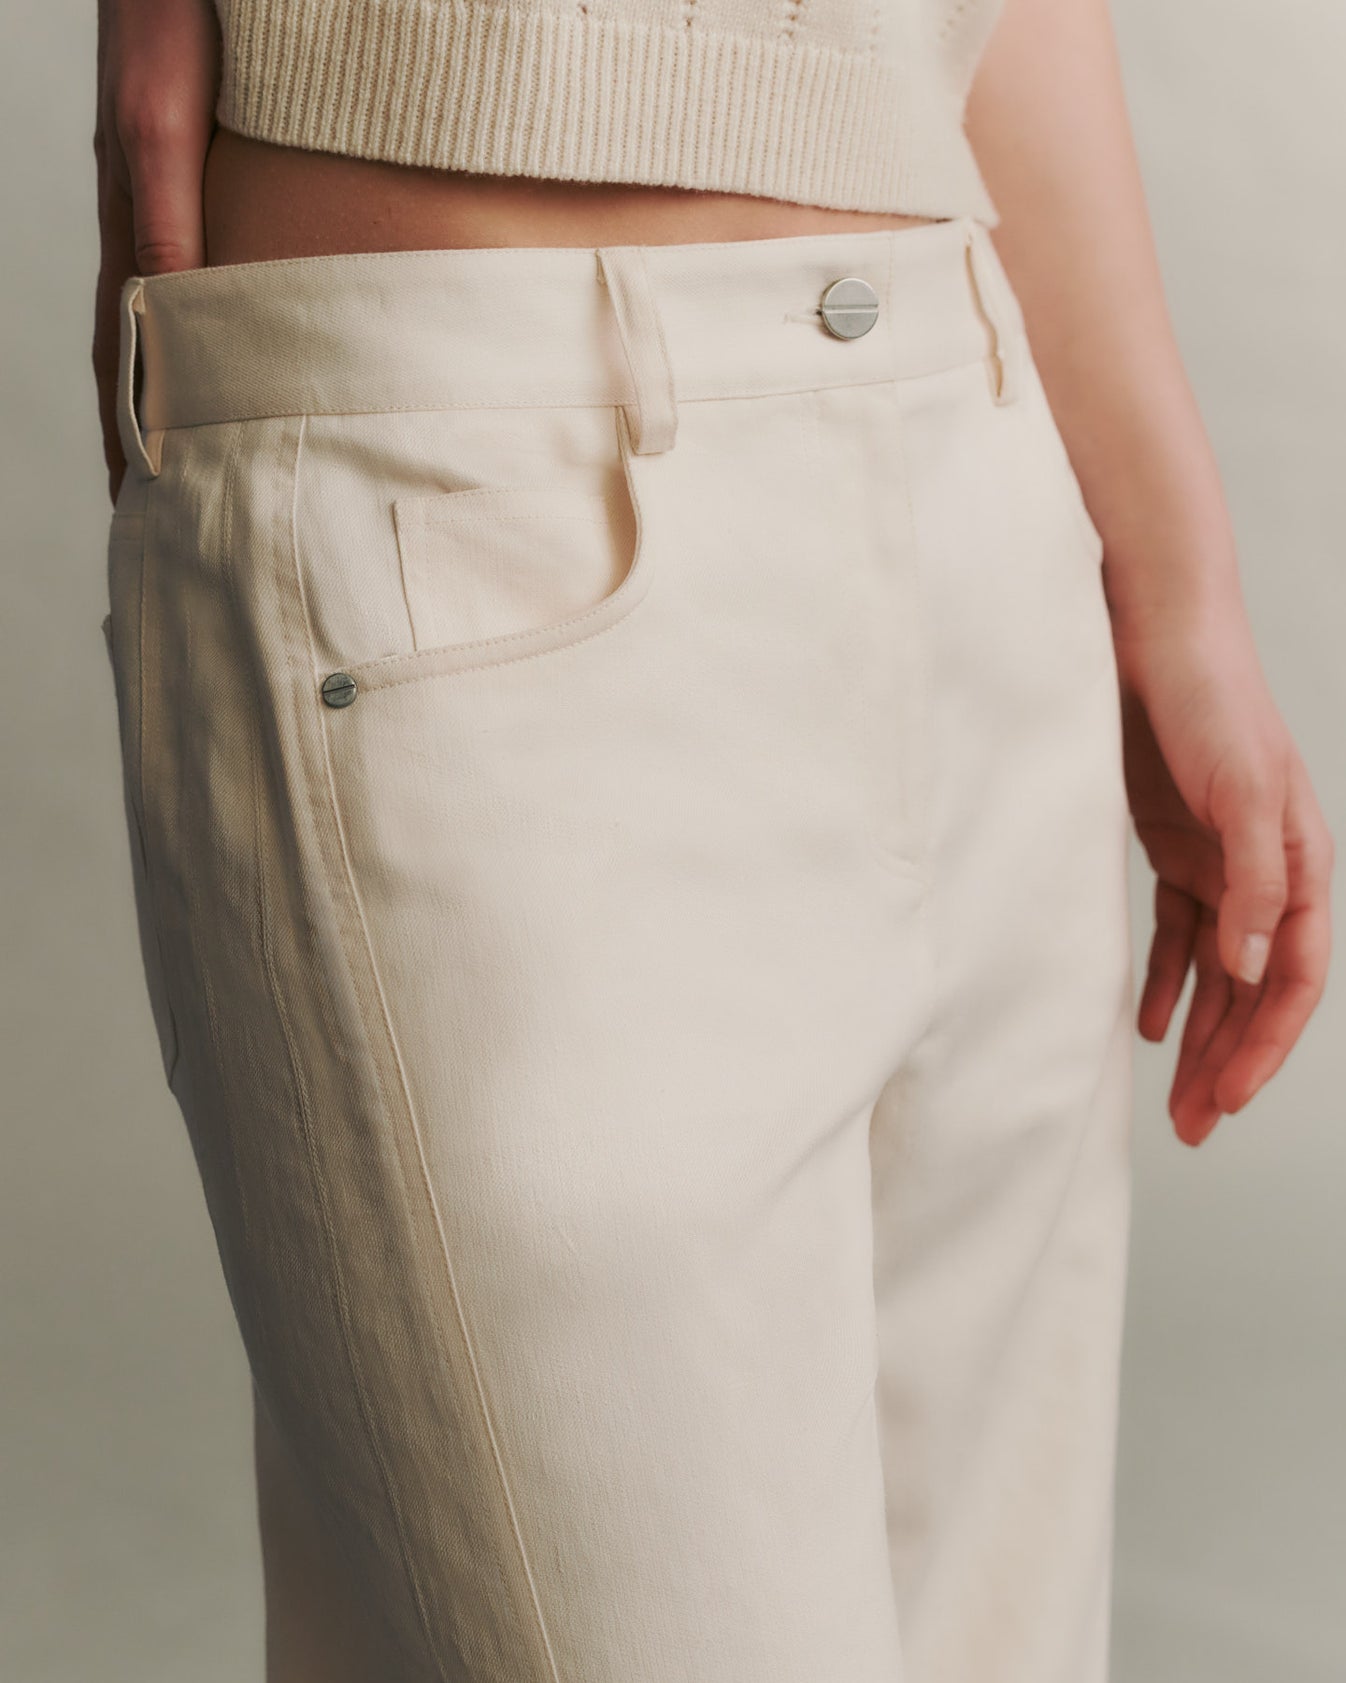 TWP Bone Puddle TWP Pant in Cotton Linen view 1